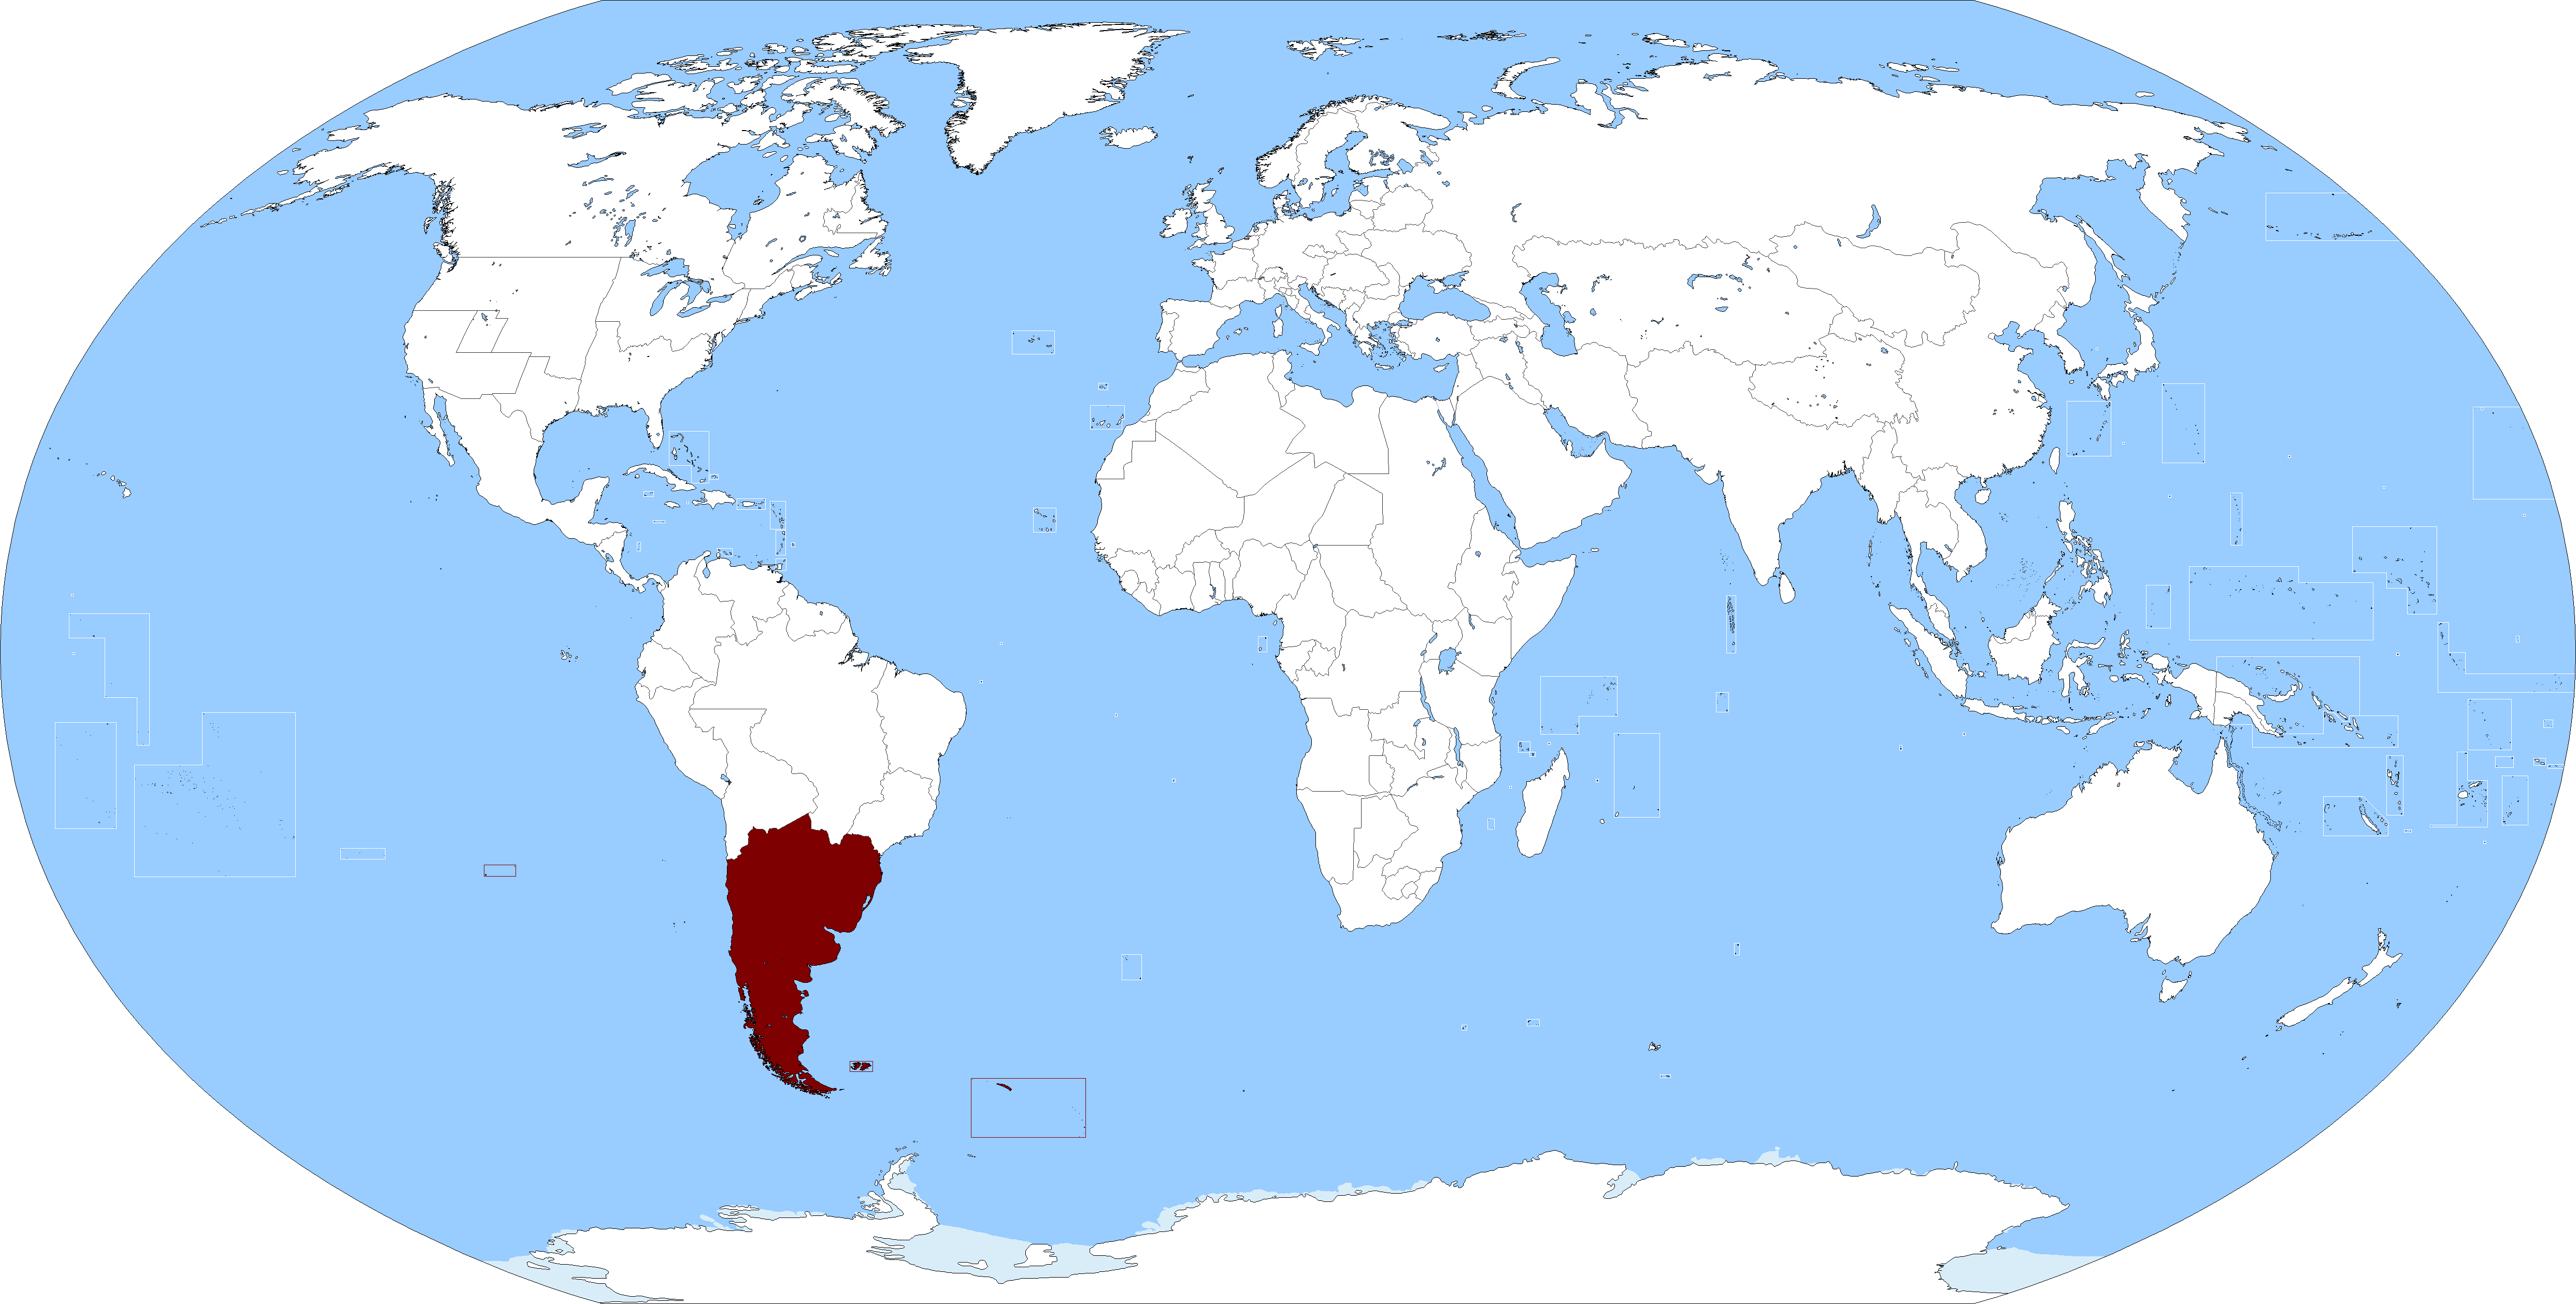 Argentina Map.png